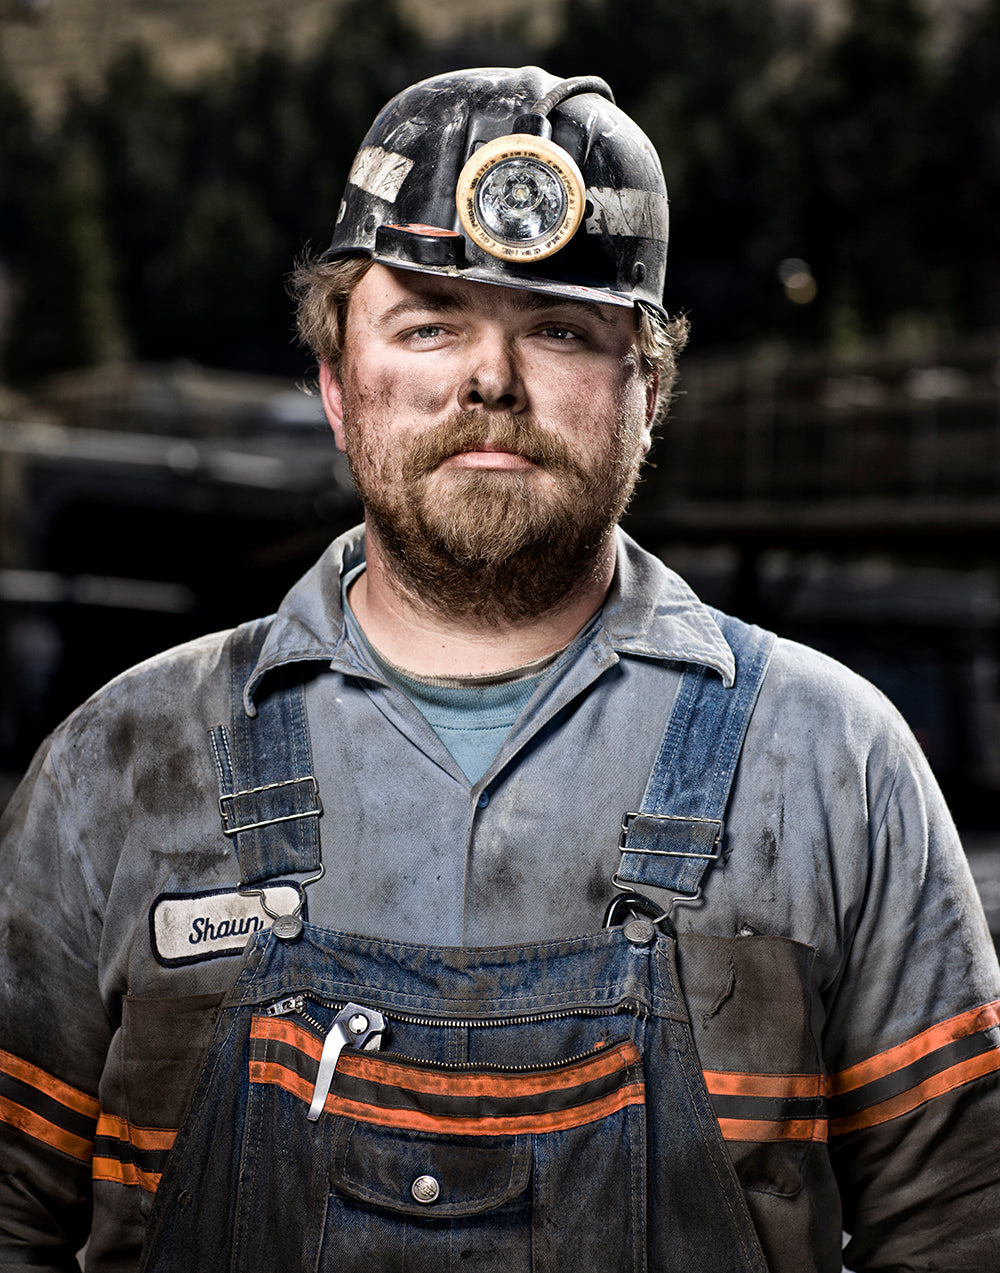 Capturing the Spirit of the Mines with Chad Hurst